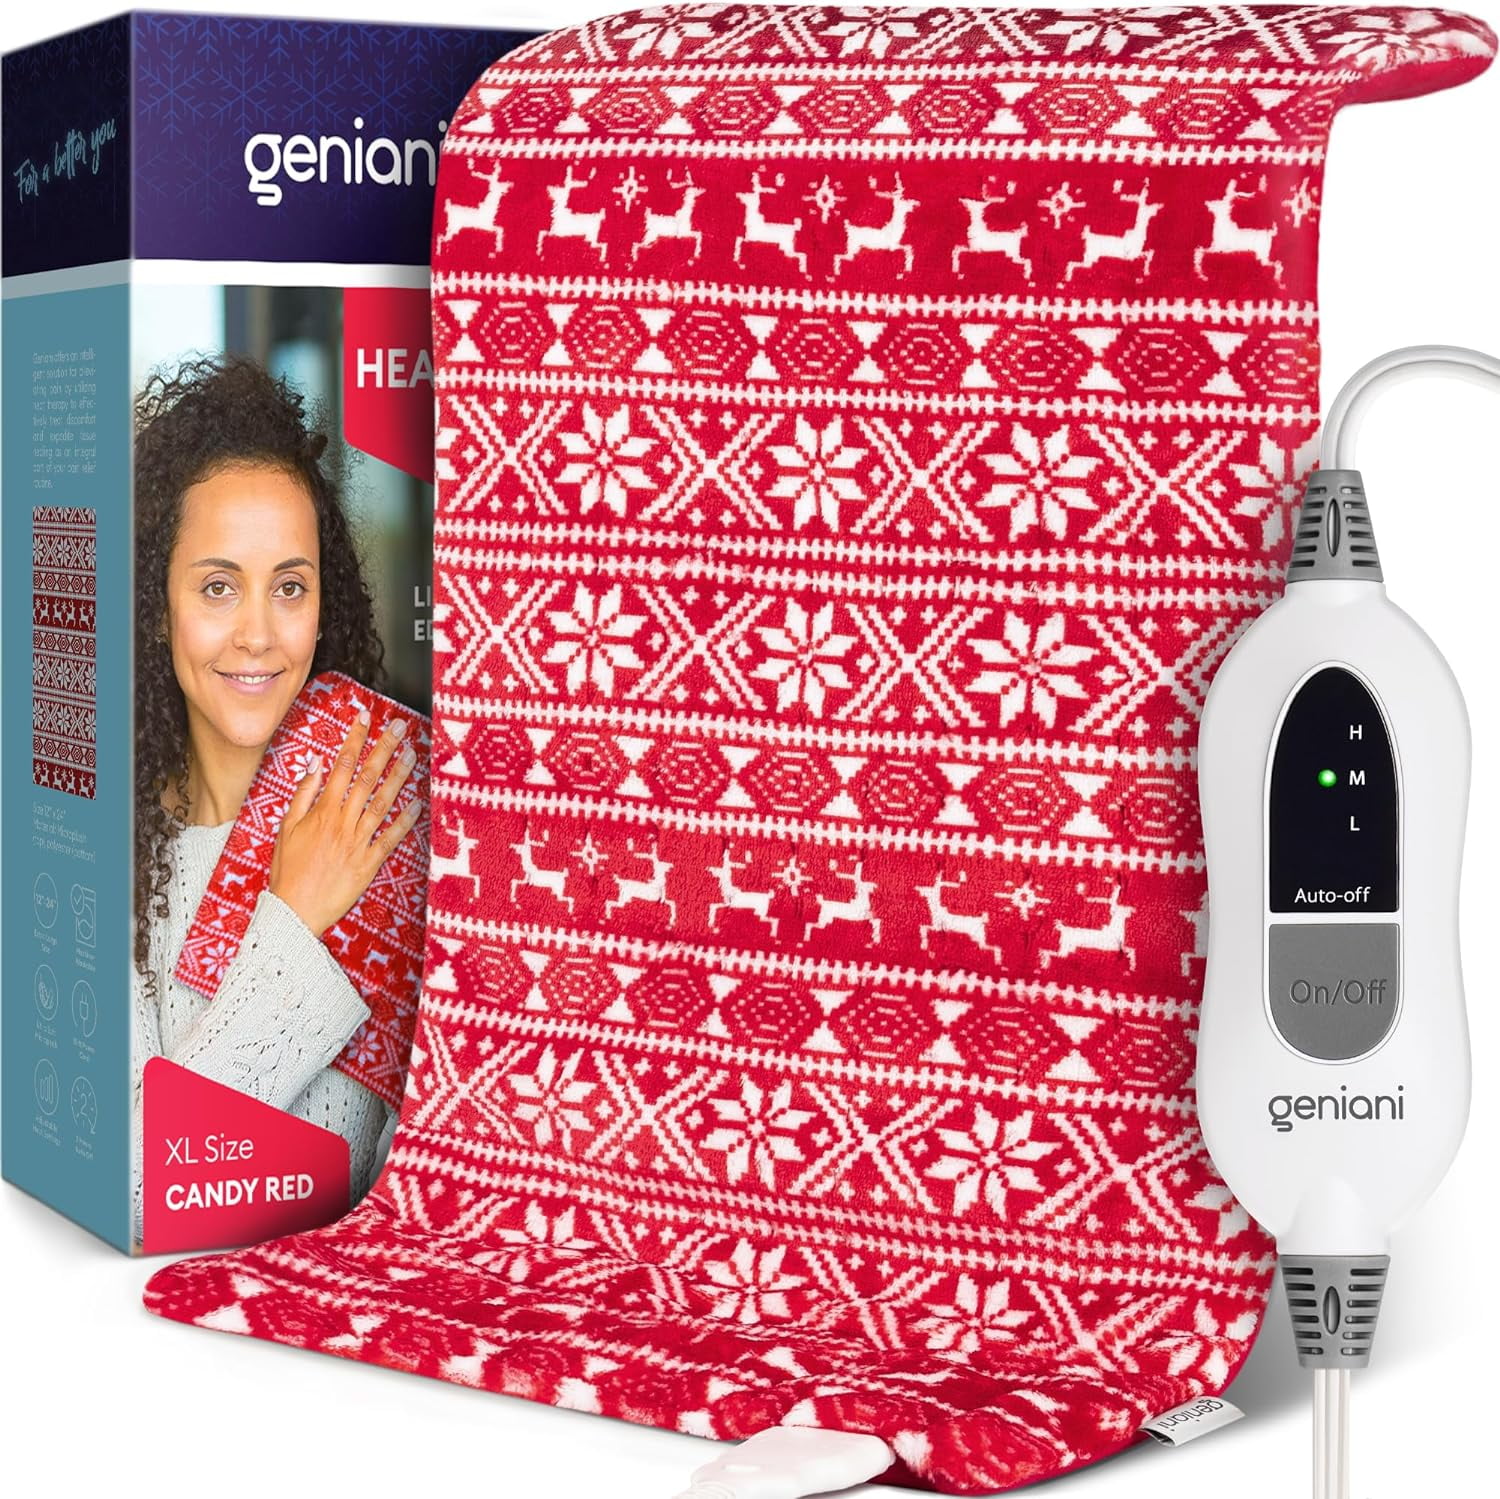 Christmas Gift GENIANI XL Heating Pad for Lower Back Pain & Period Cramps Relief, Auto Shut Off, Machine Washable Heat Pad, Christmas Gifts for Men & Women, Mom, Father (Candy Red)